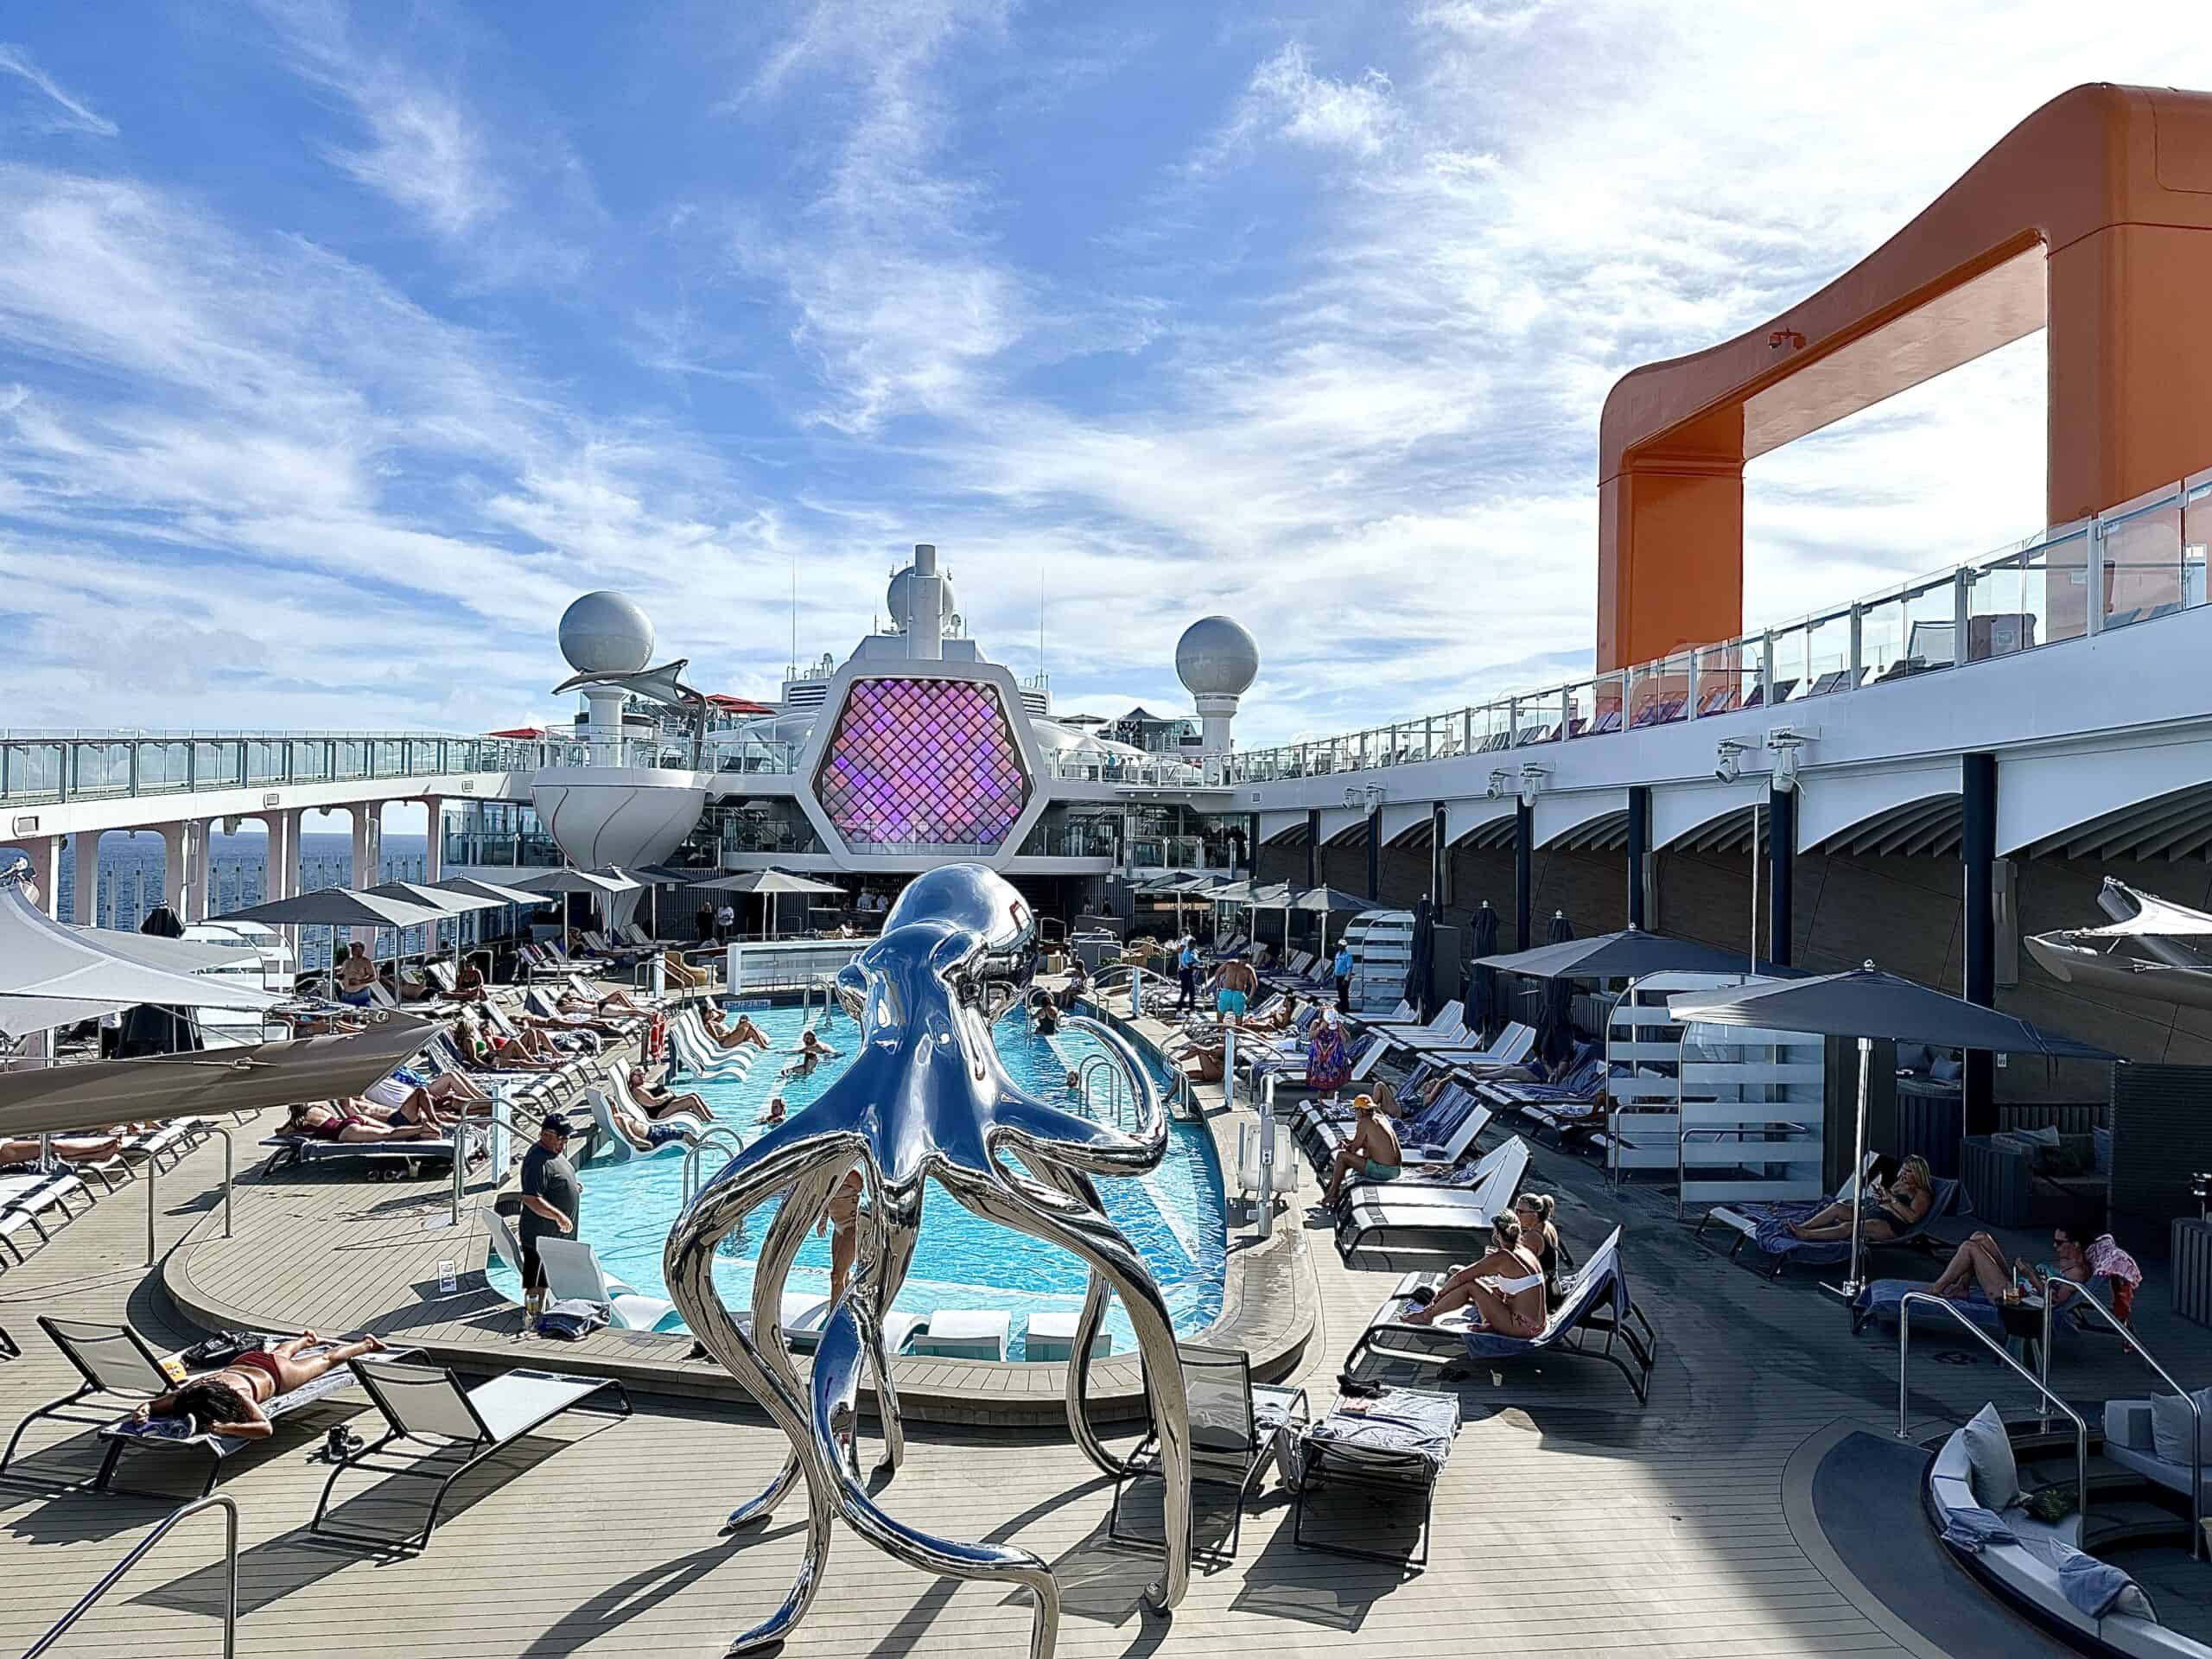 New Celebrity Ascent Cruise Ship Details and Review